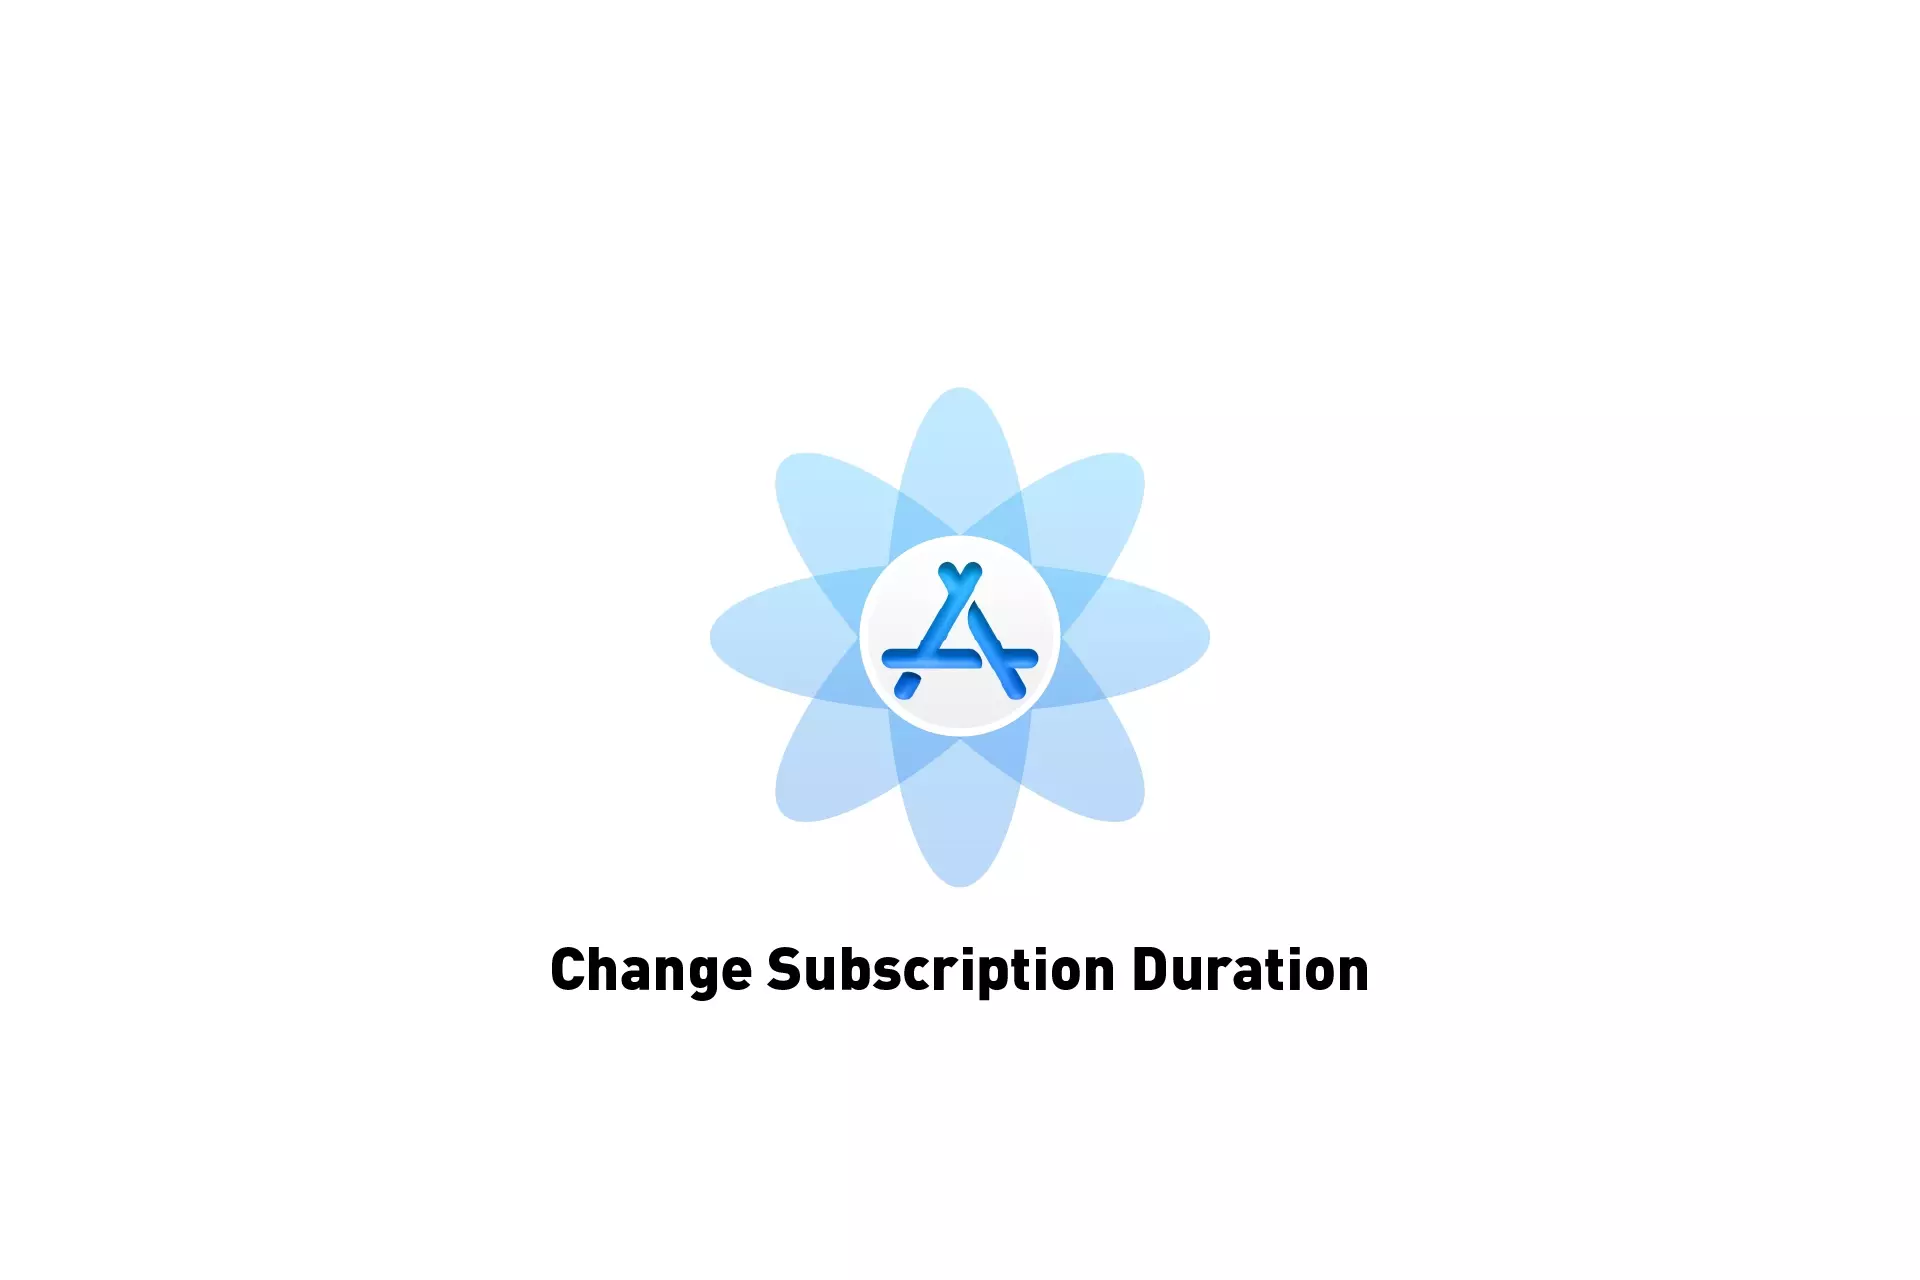 A flower that represents App Store Connect with the text "Change Subscription Duration" beneath it.